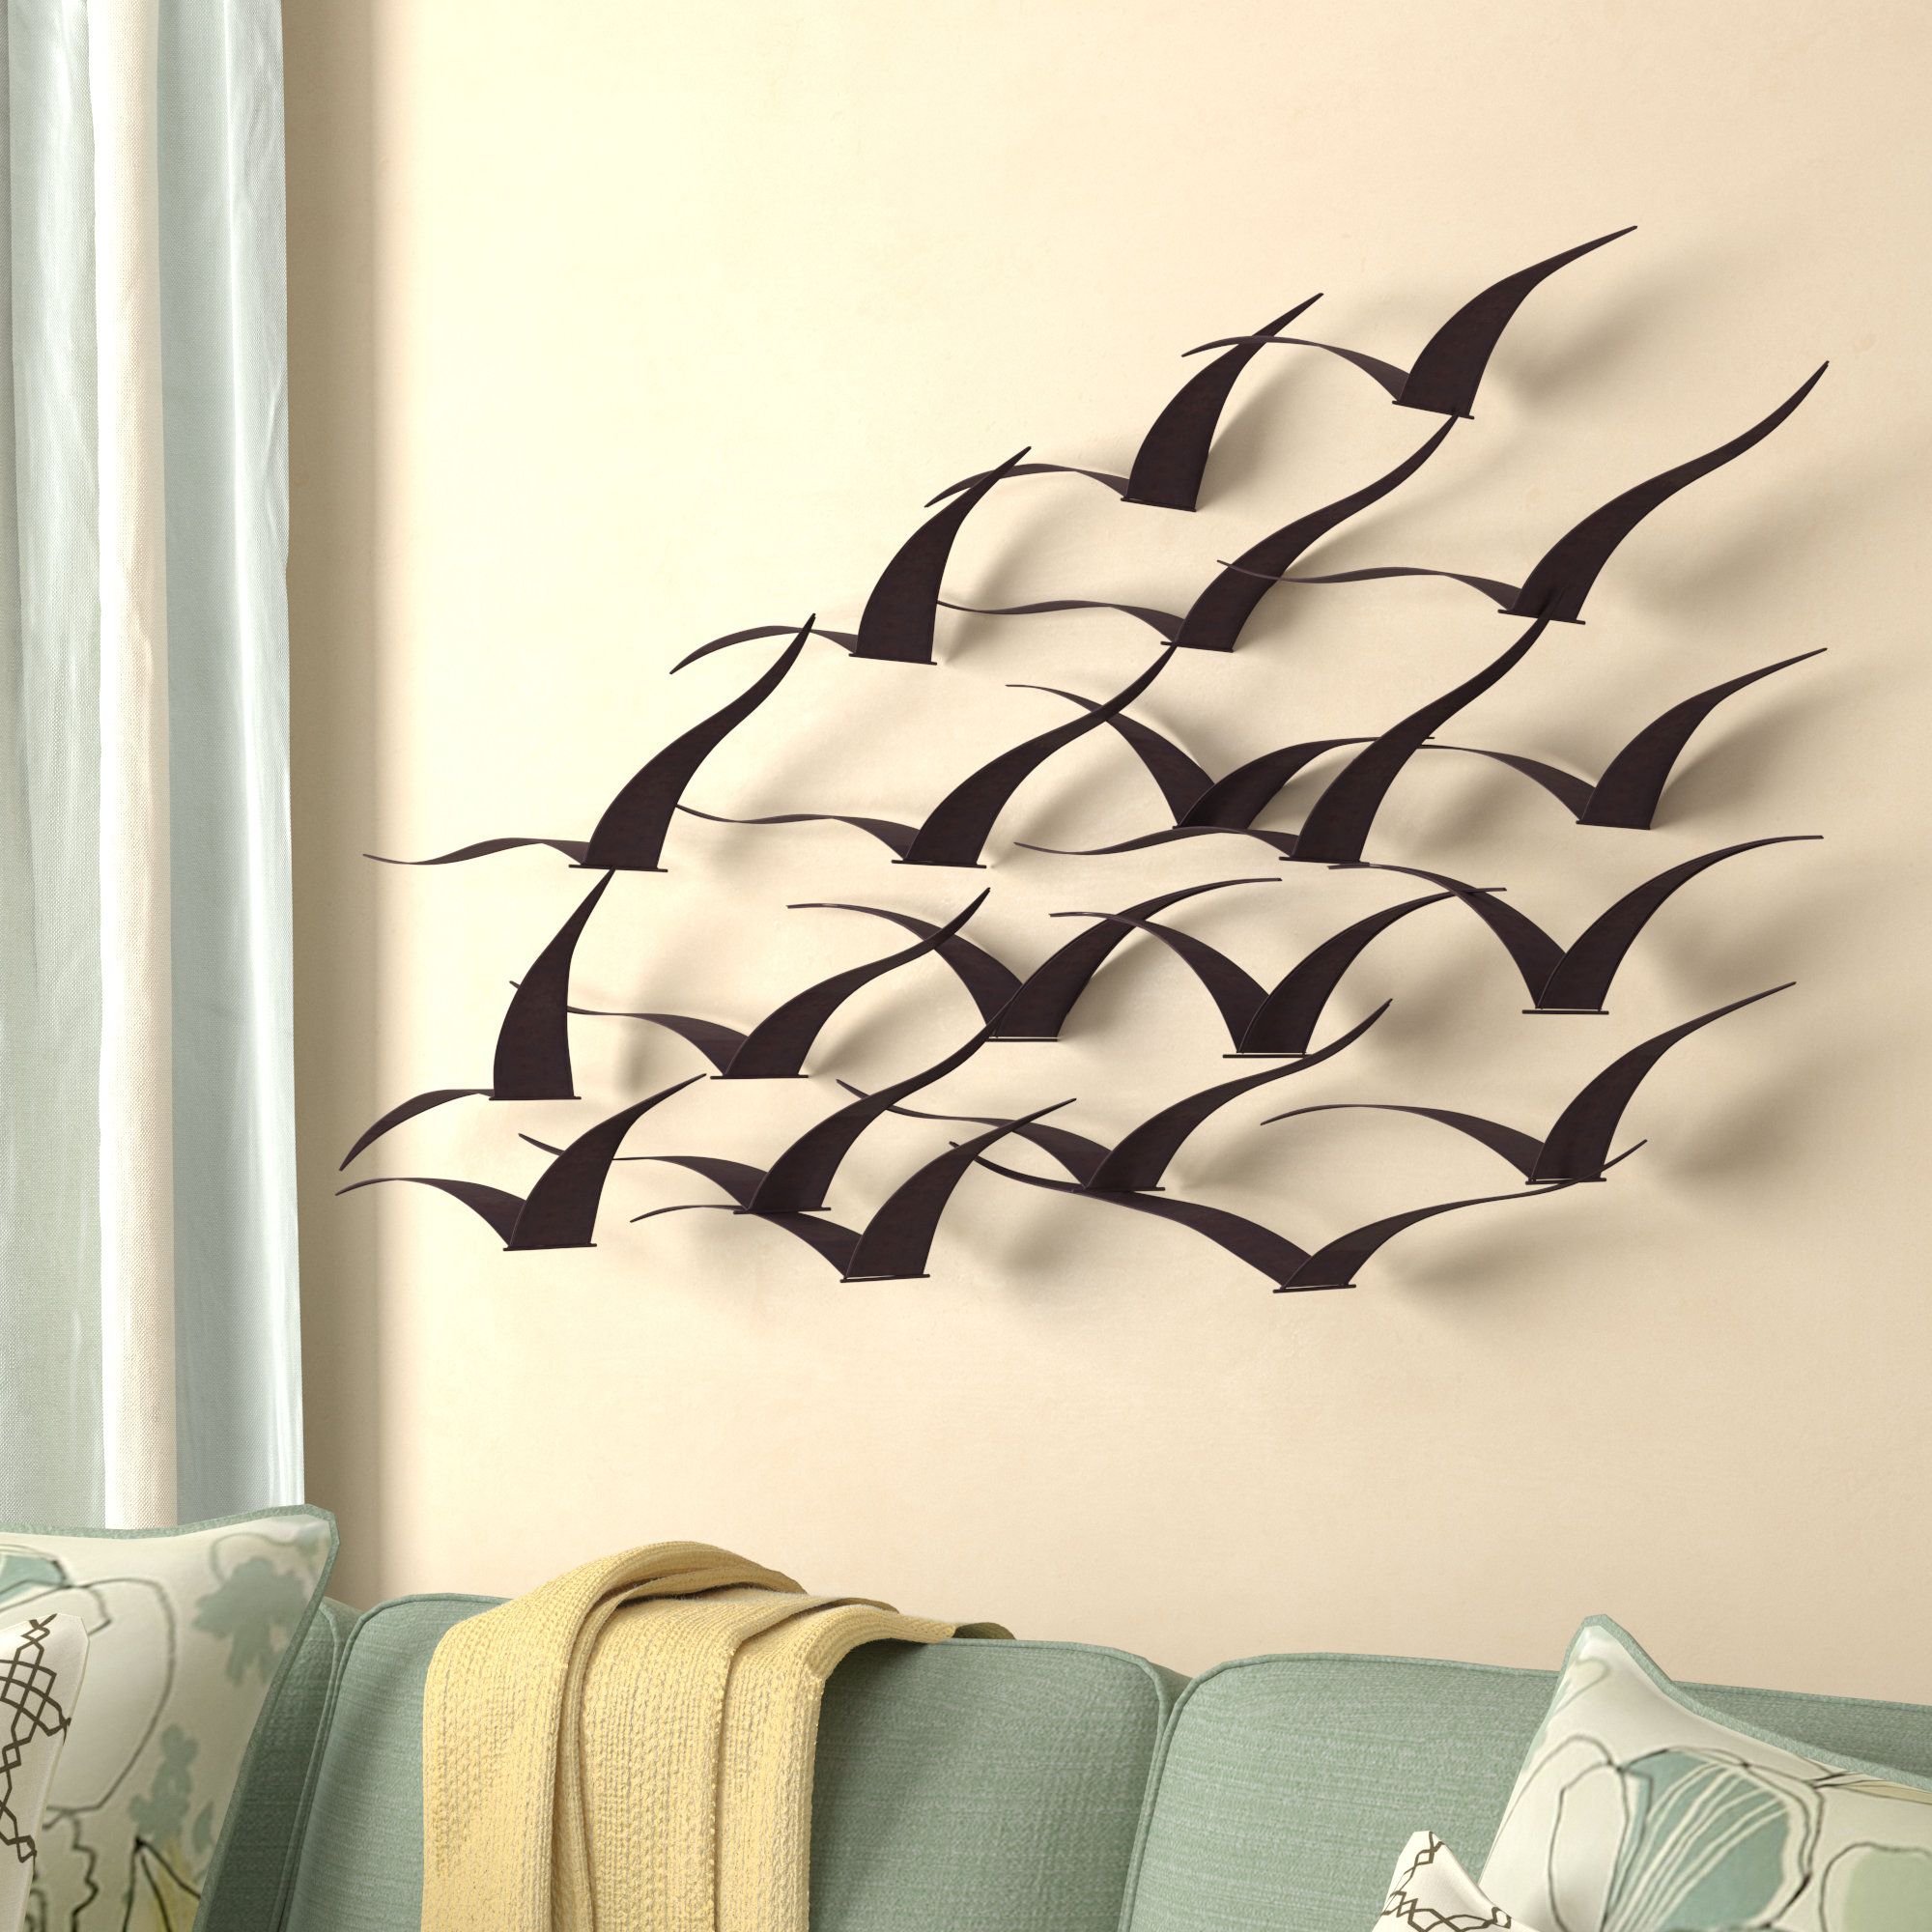 Current Wooden Blocks Metal Wall Art In Metal Bird Wall Decor You'll Love In 2021 – Visualhunt (View 6 of 15)